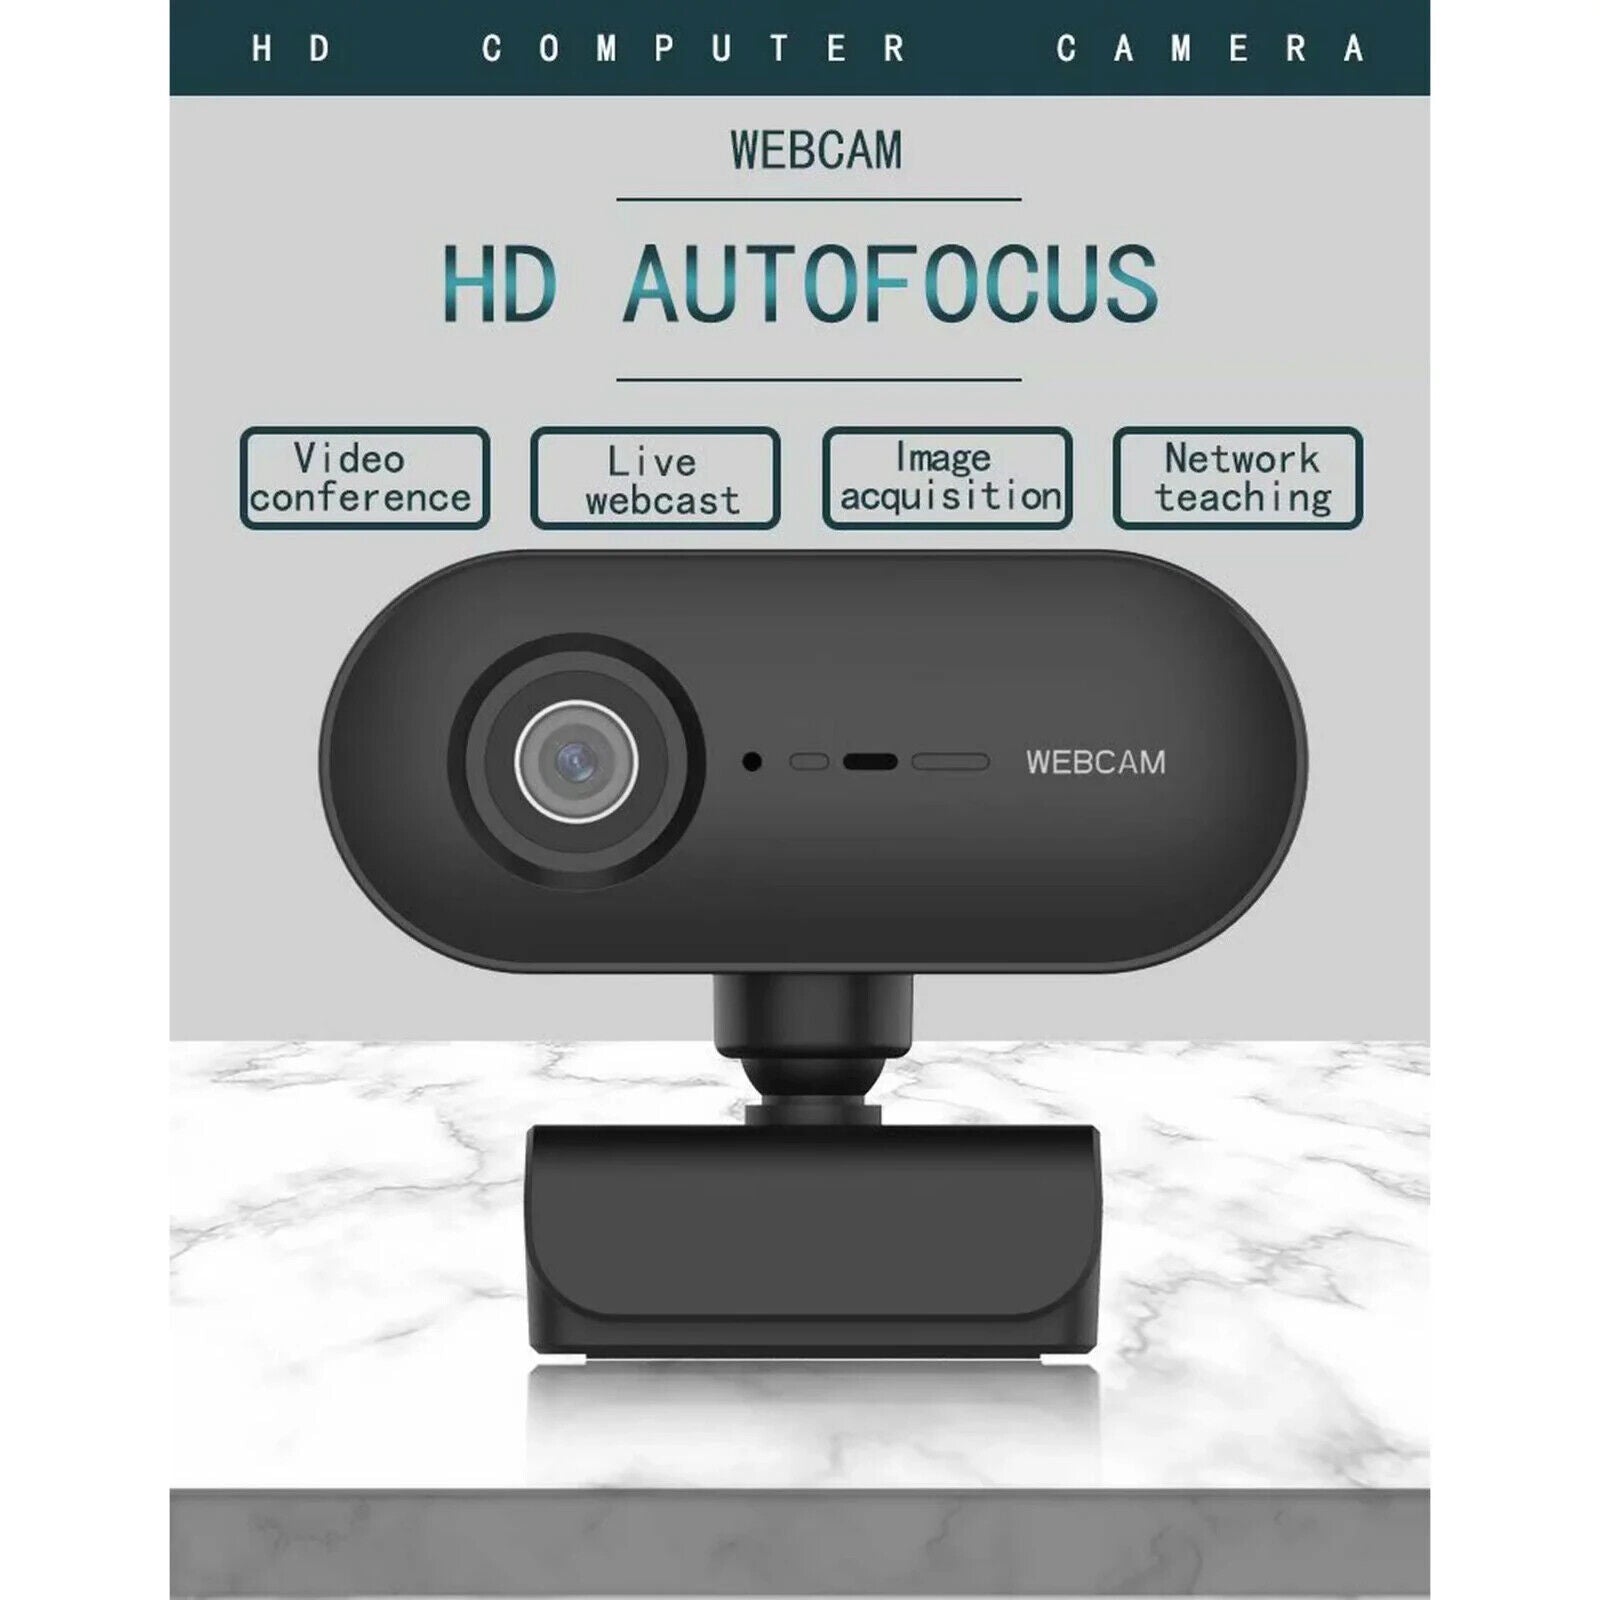 HD Webcam w/ High Quality Glass Lens Clear Image - Video Chat/Webcast/Conference